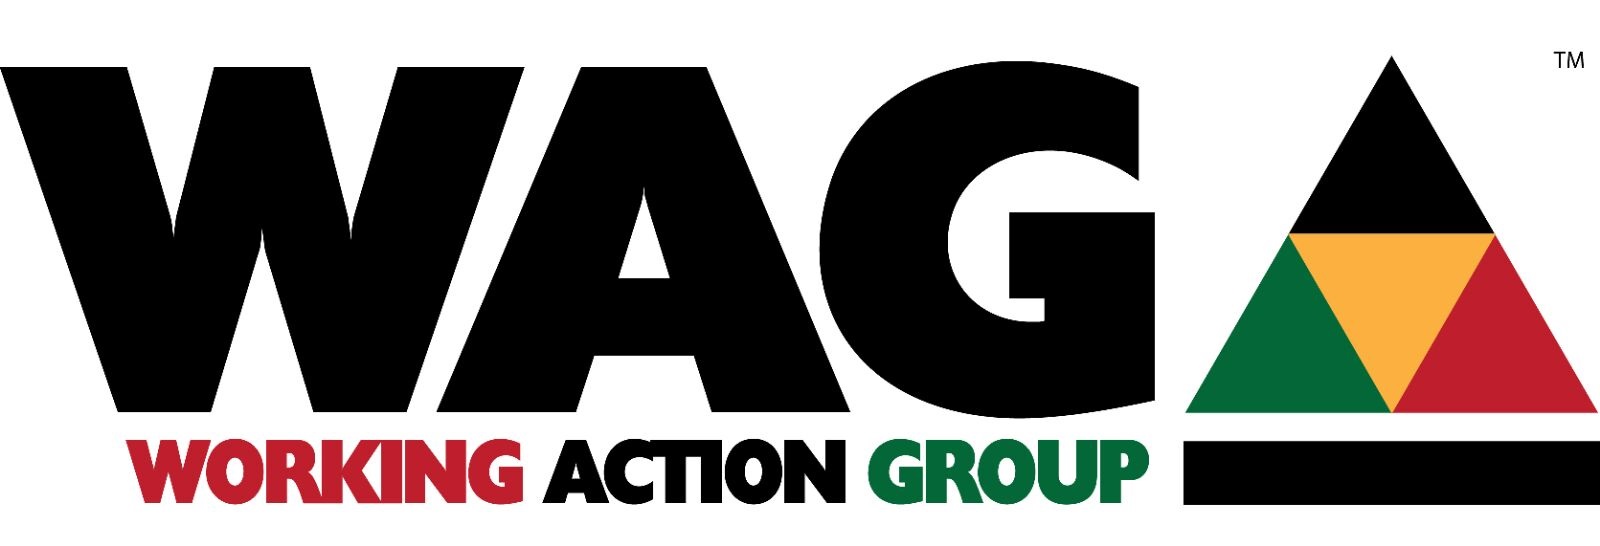 logo for working action group